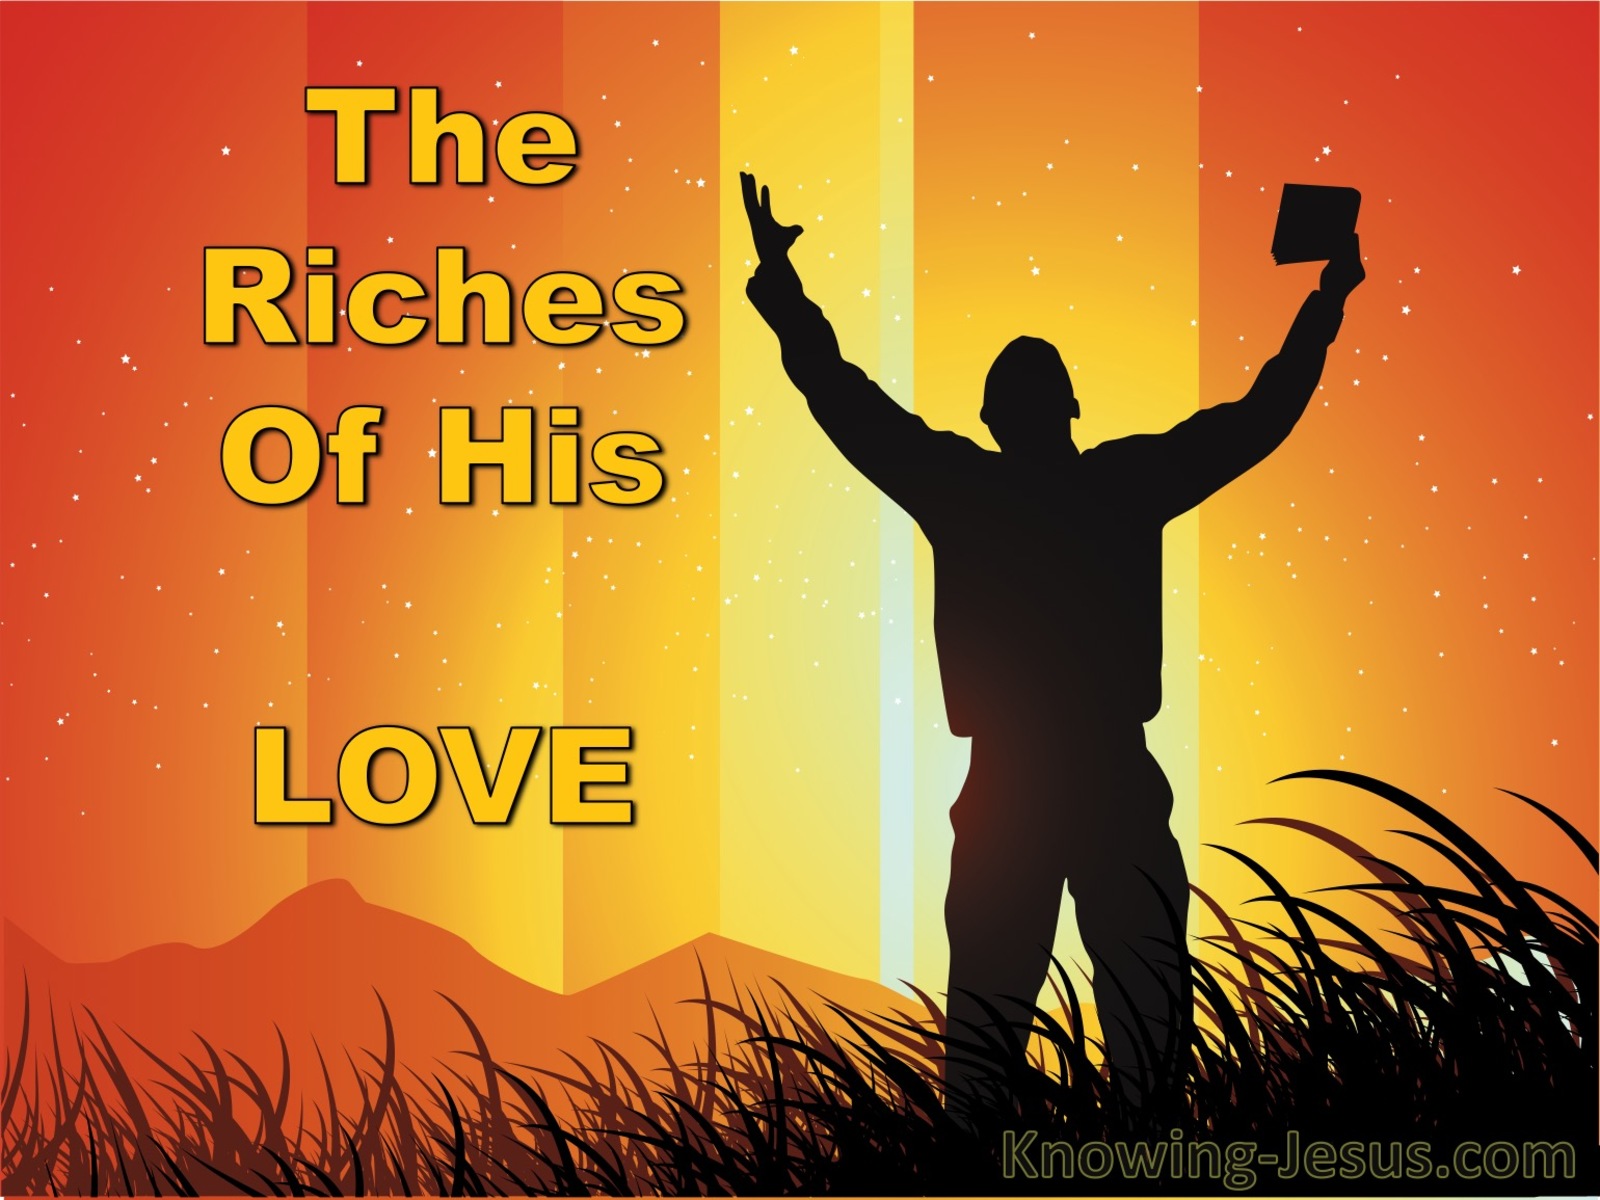 The Riches Of His Love (devotional) (orange)